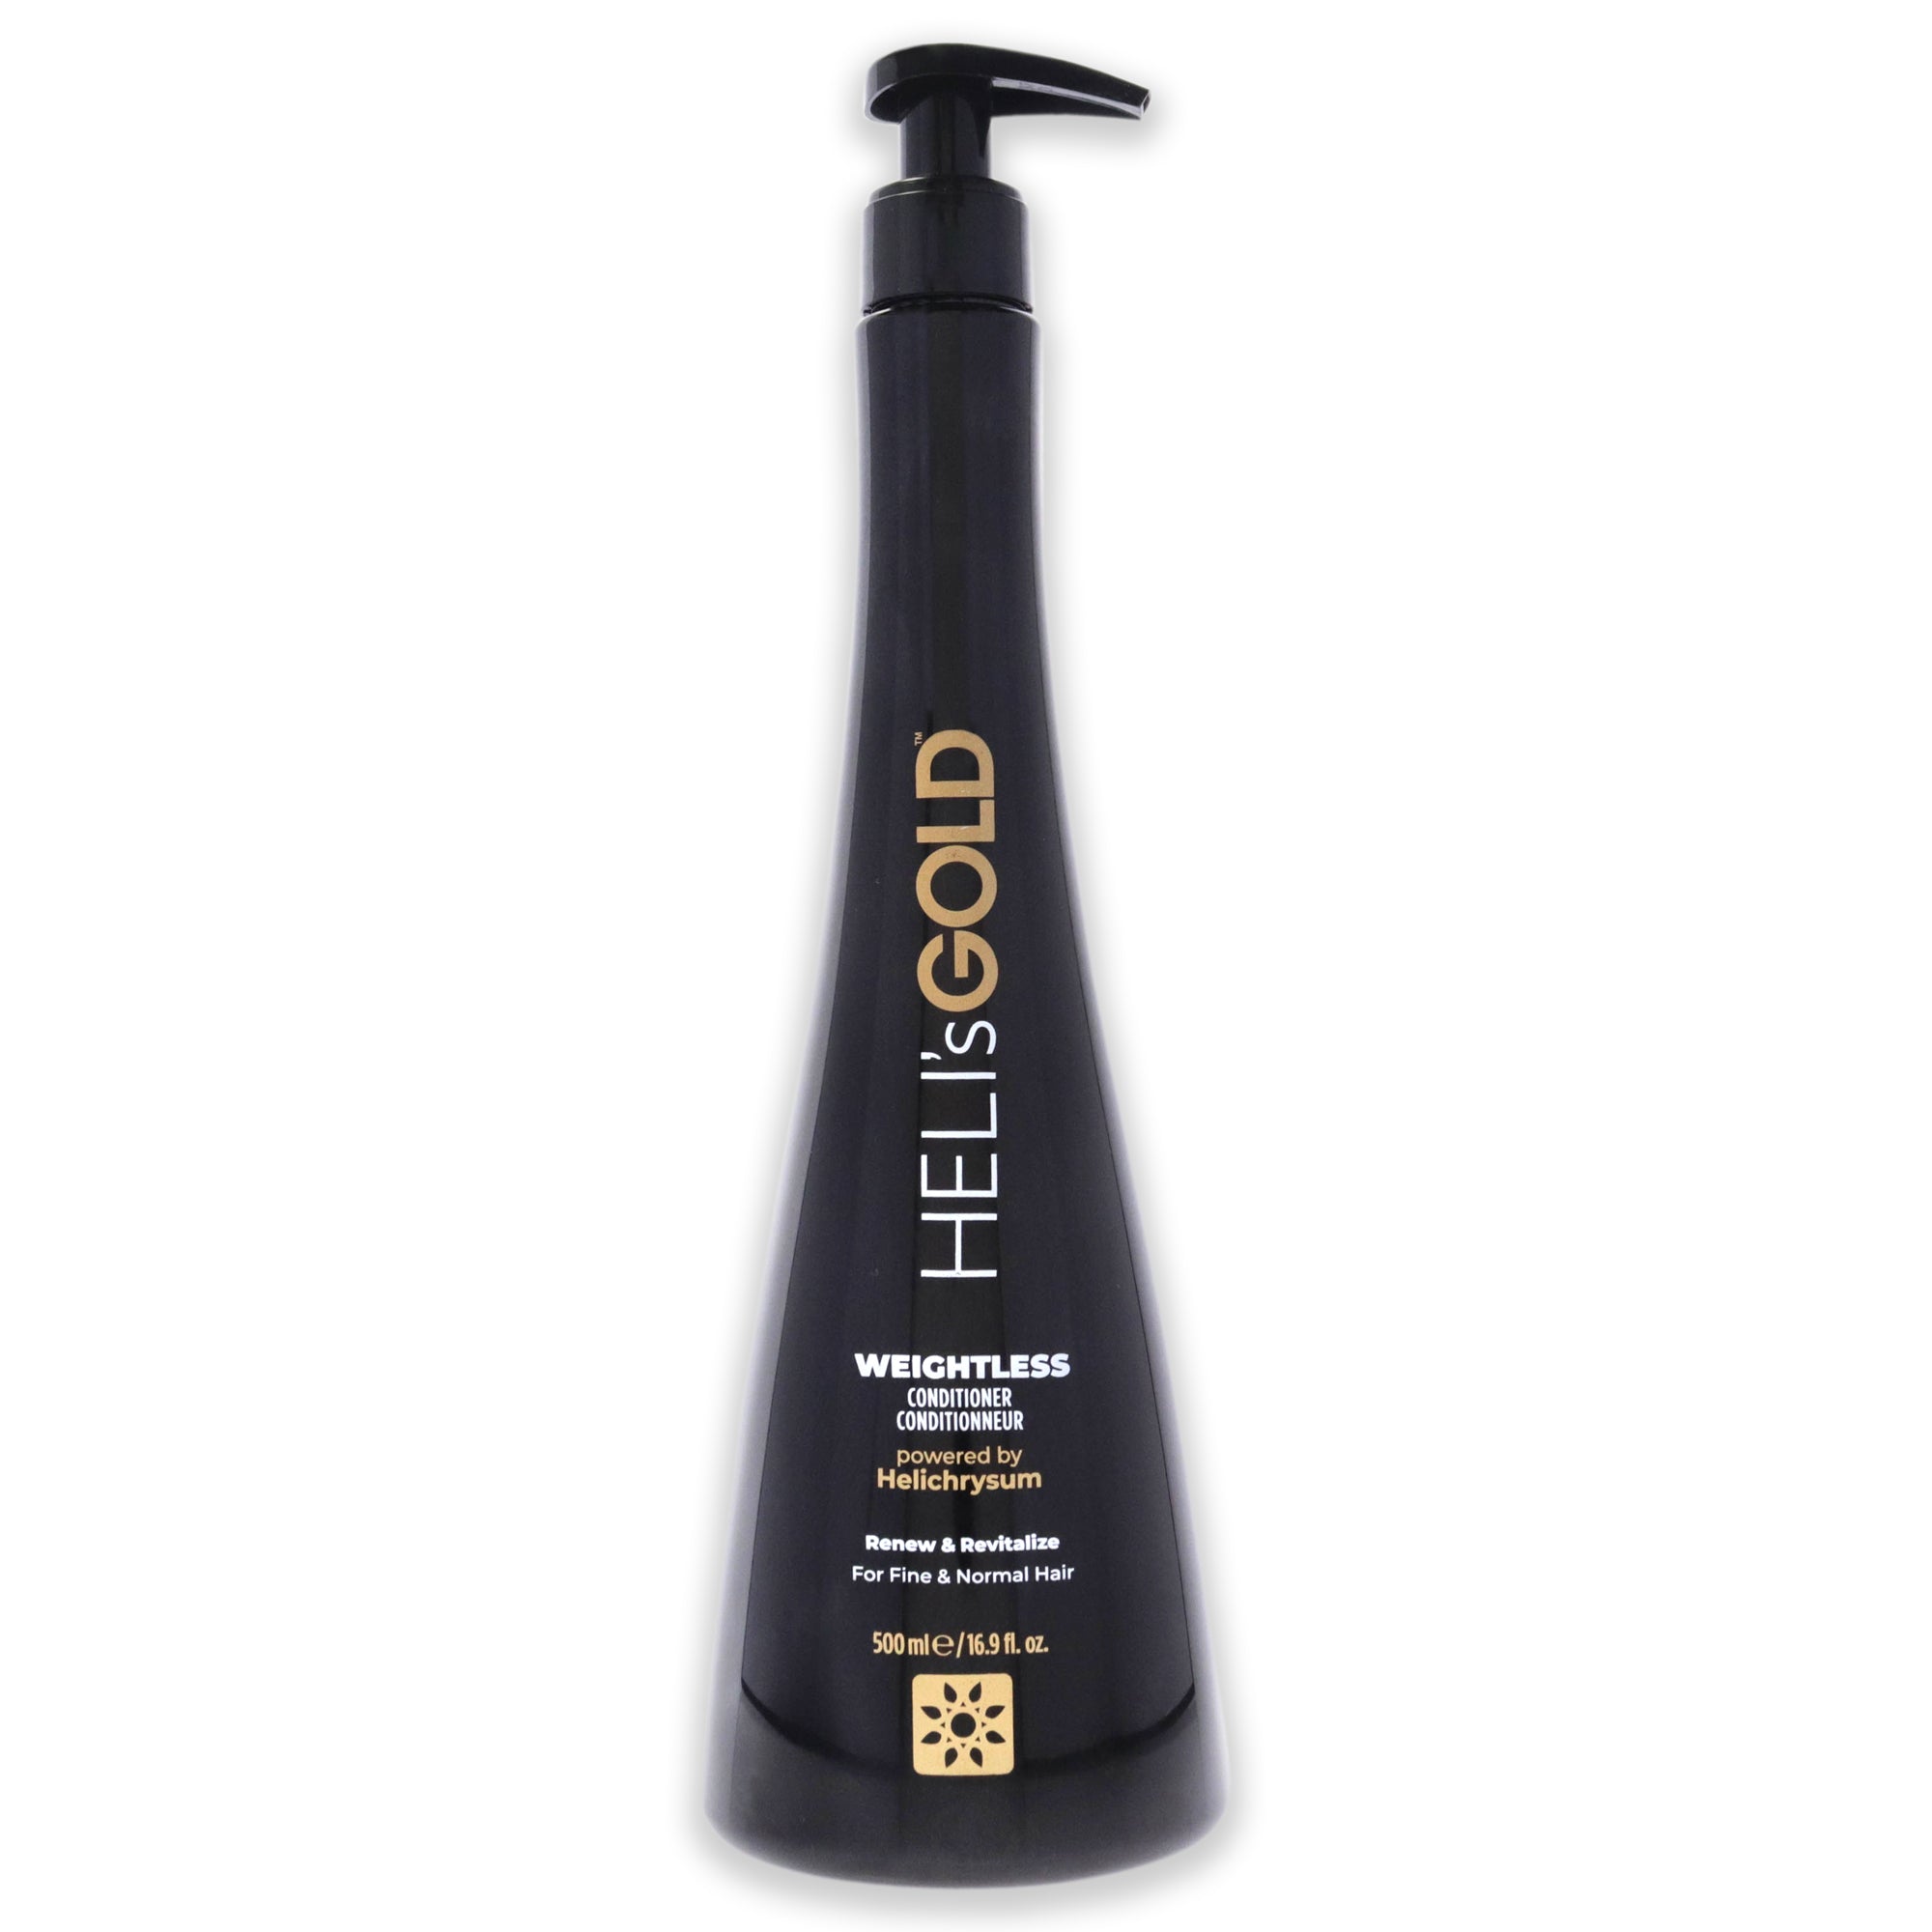 Weightless Conditioner by Helis Gold for Unisex - 16.9 oz Conditioner